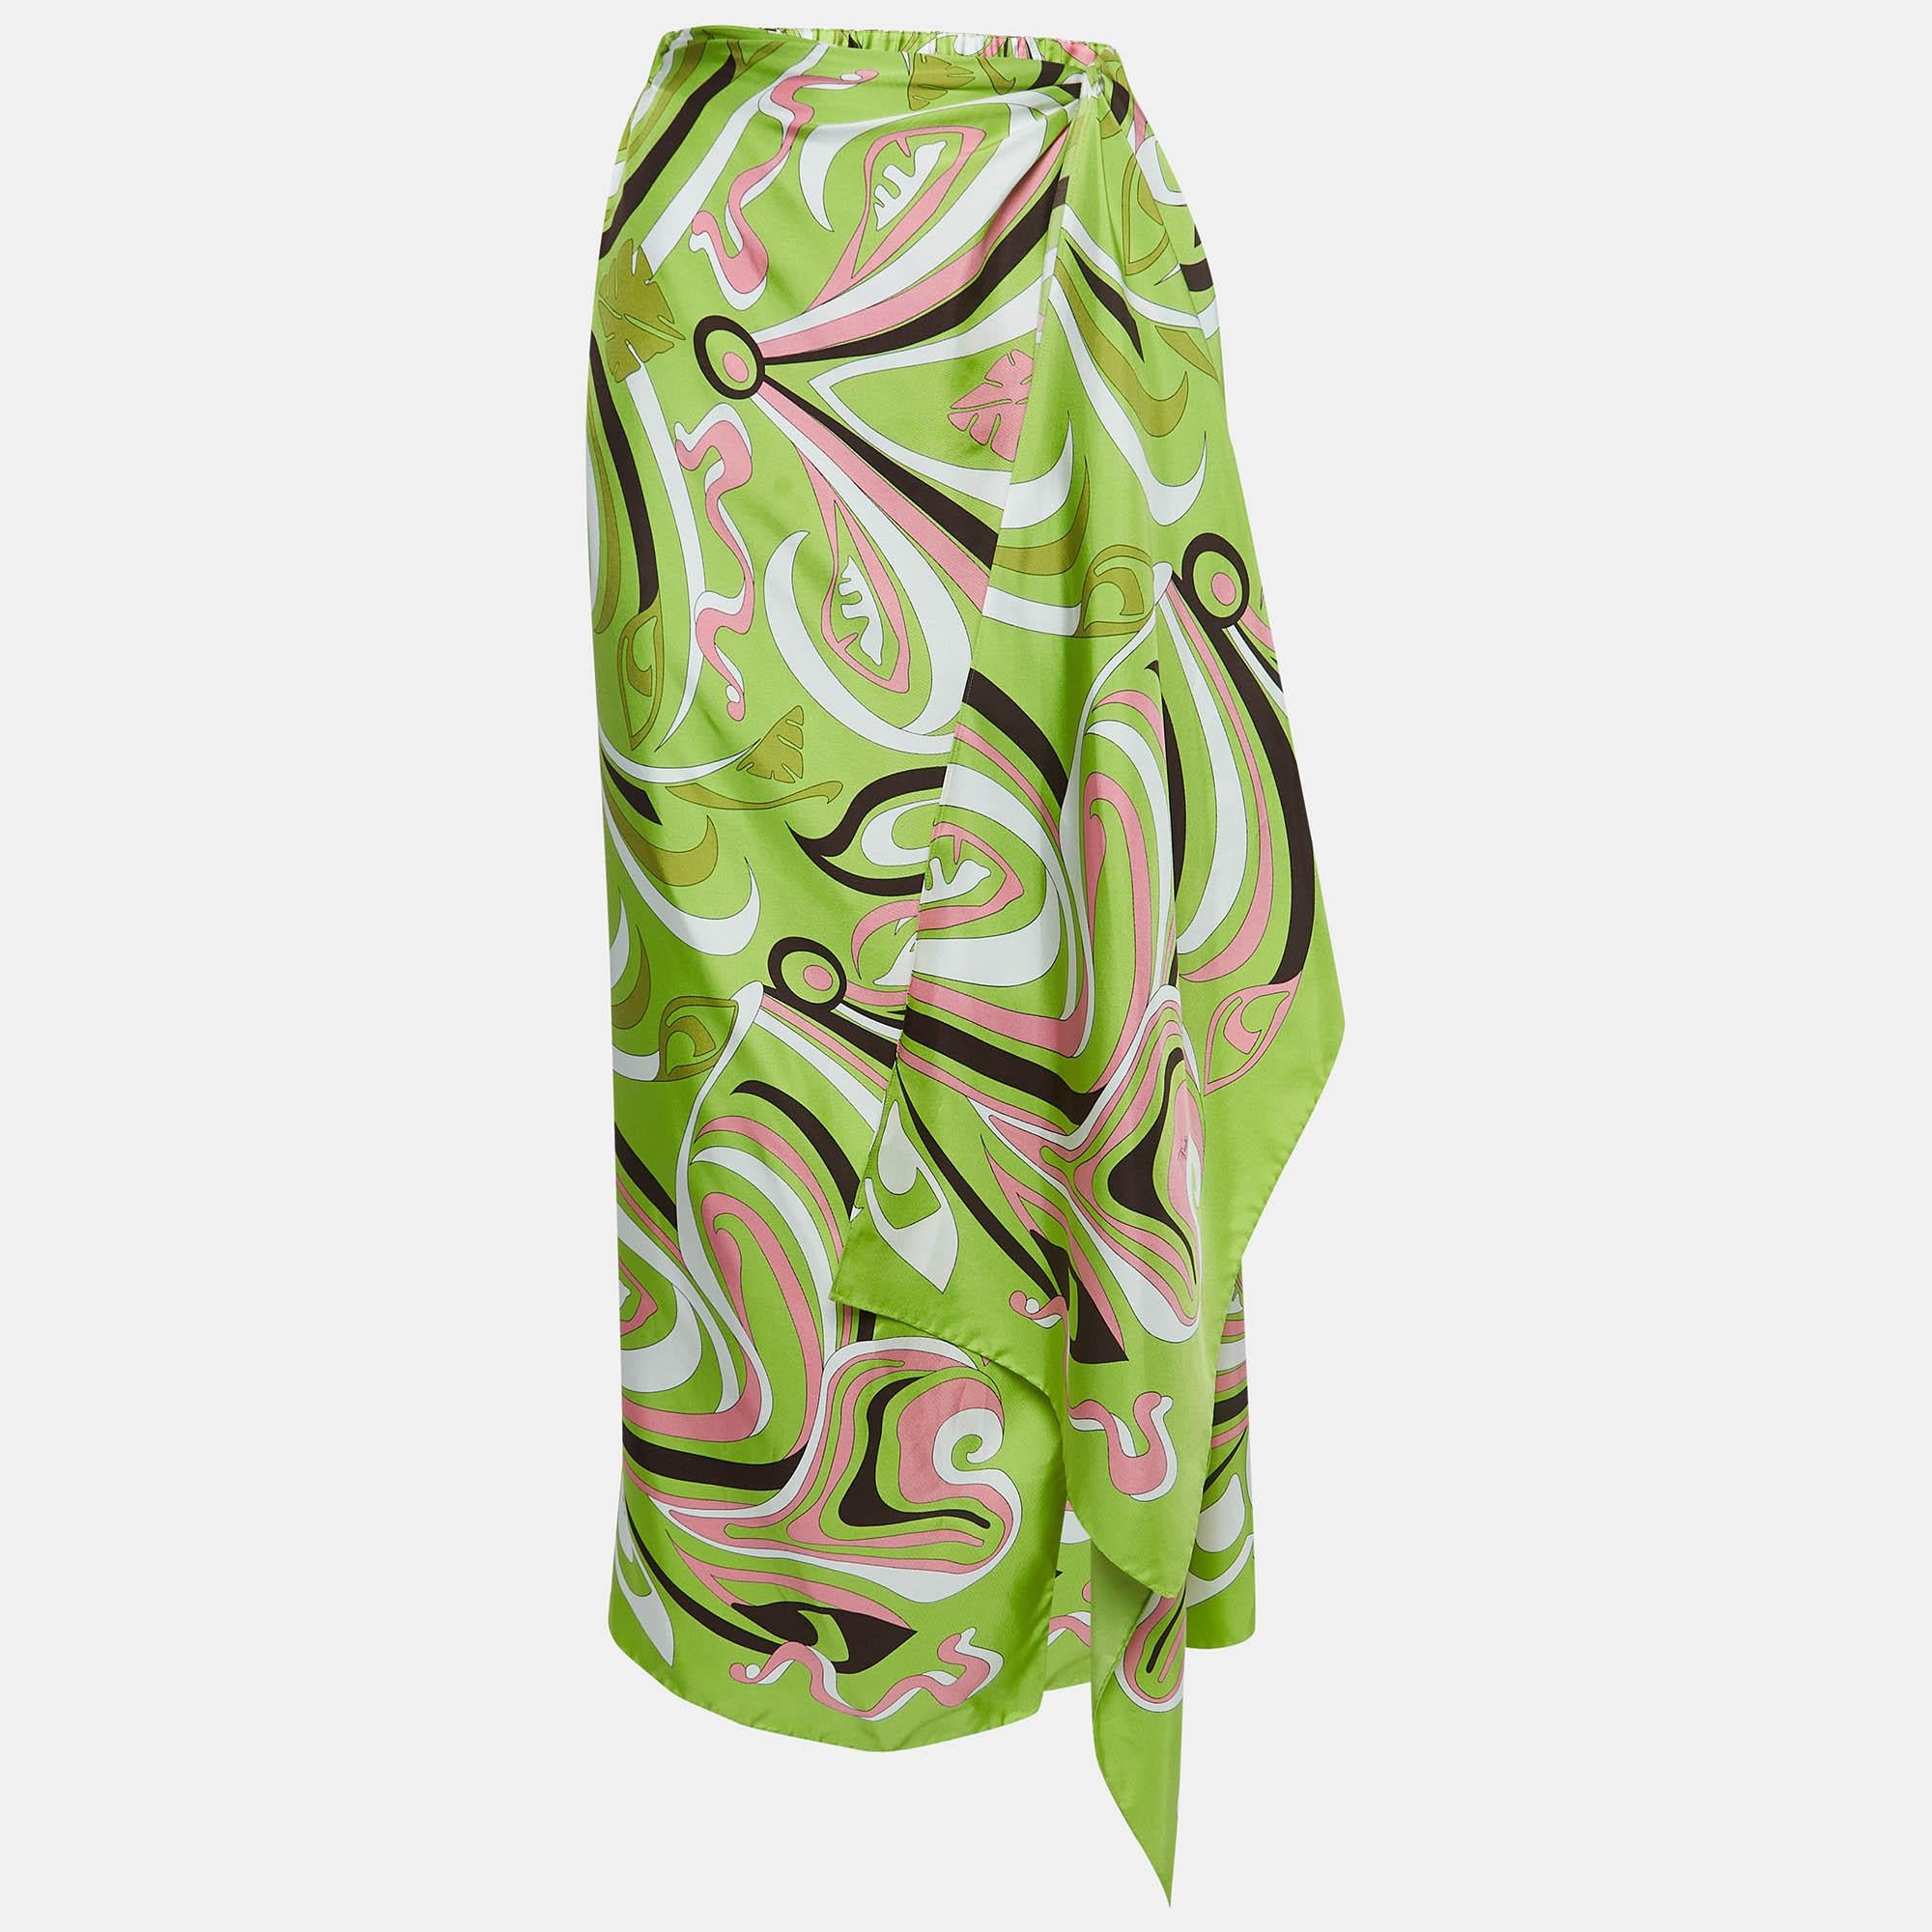 Crafted from luxurious silk, the Emilio Pucci pareo exudes effortless charm. Vibrant green hues dance across the fabric, adorned with Pucci's signature intricate patterns, evoking a sense of wanderlust and style. Perfect for poolside lounging or a